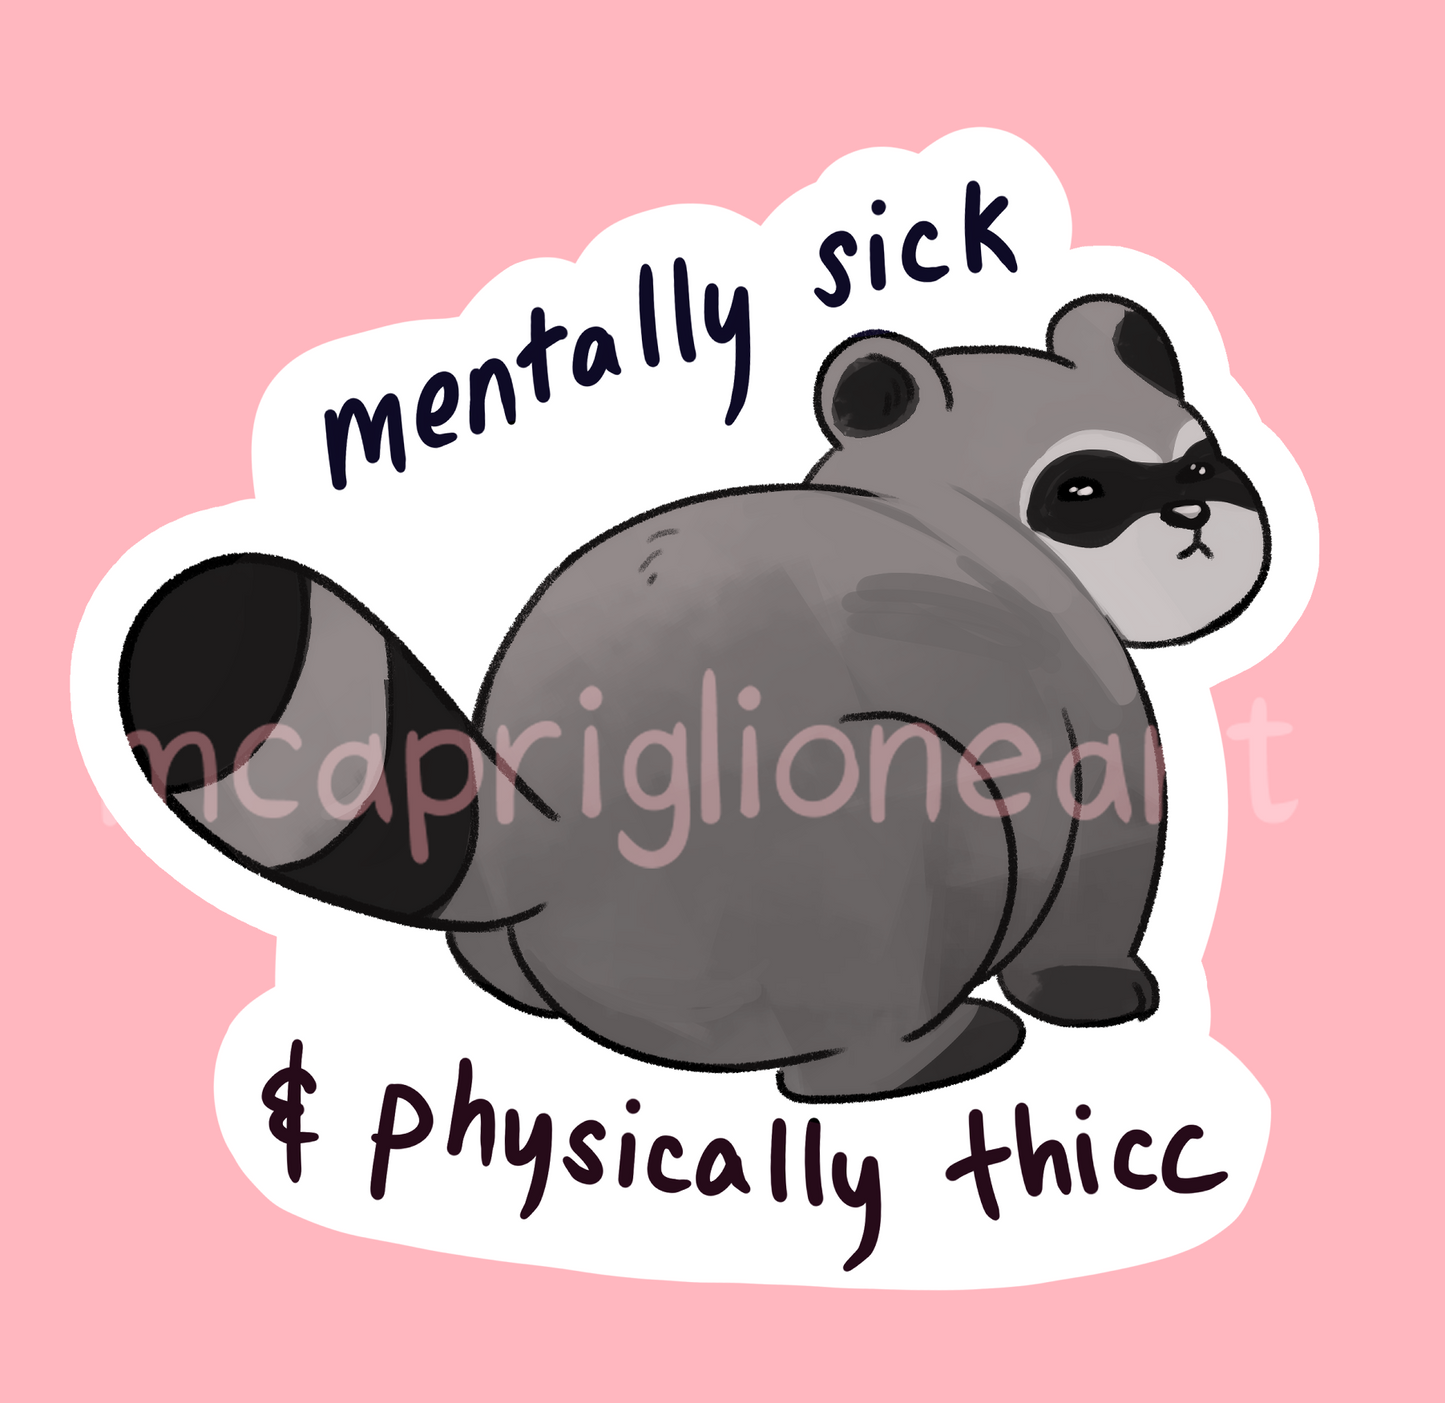 Mentally Sick Physically Thick Raccoon Sticker